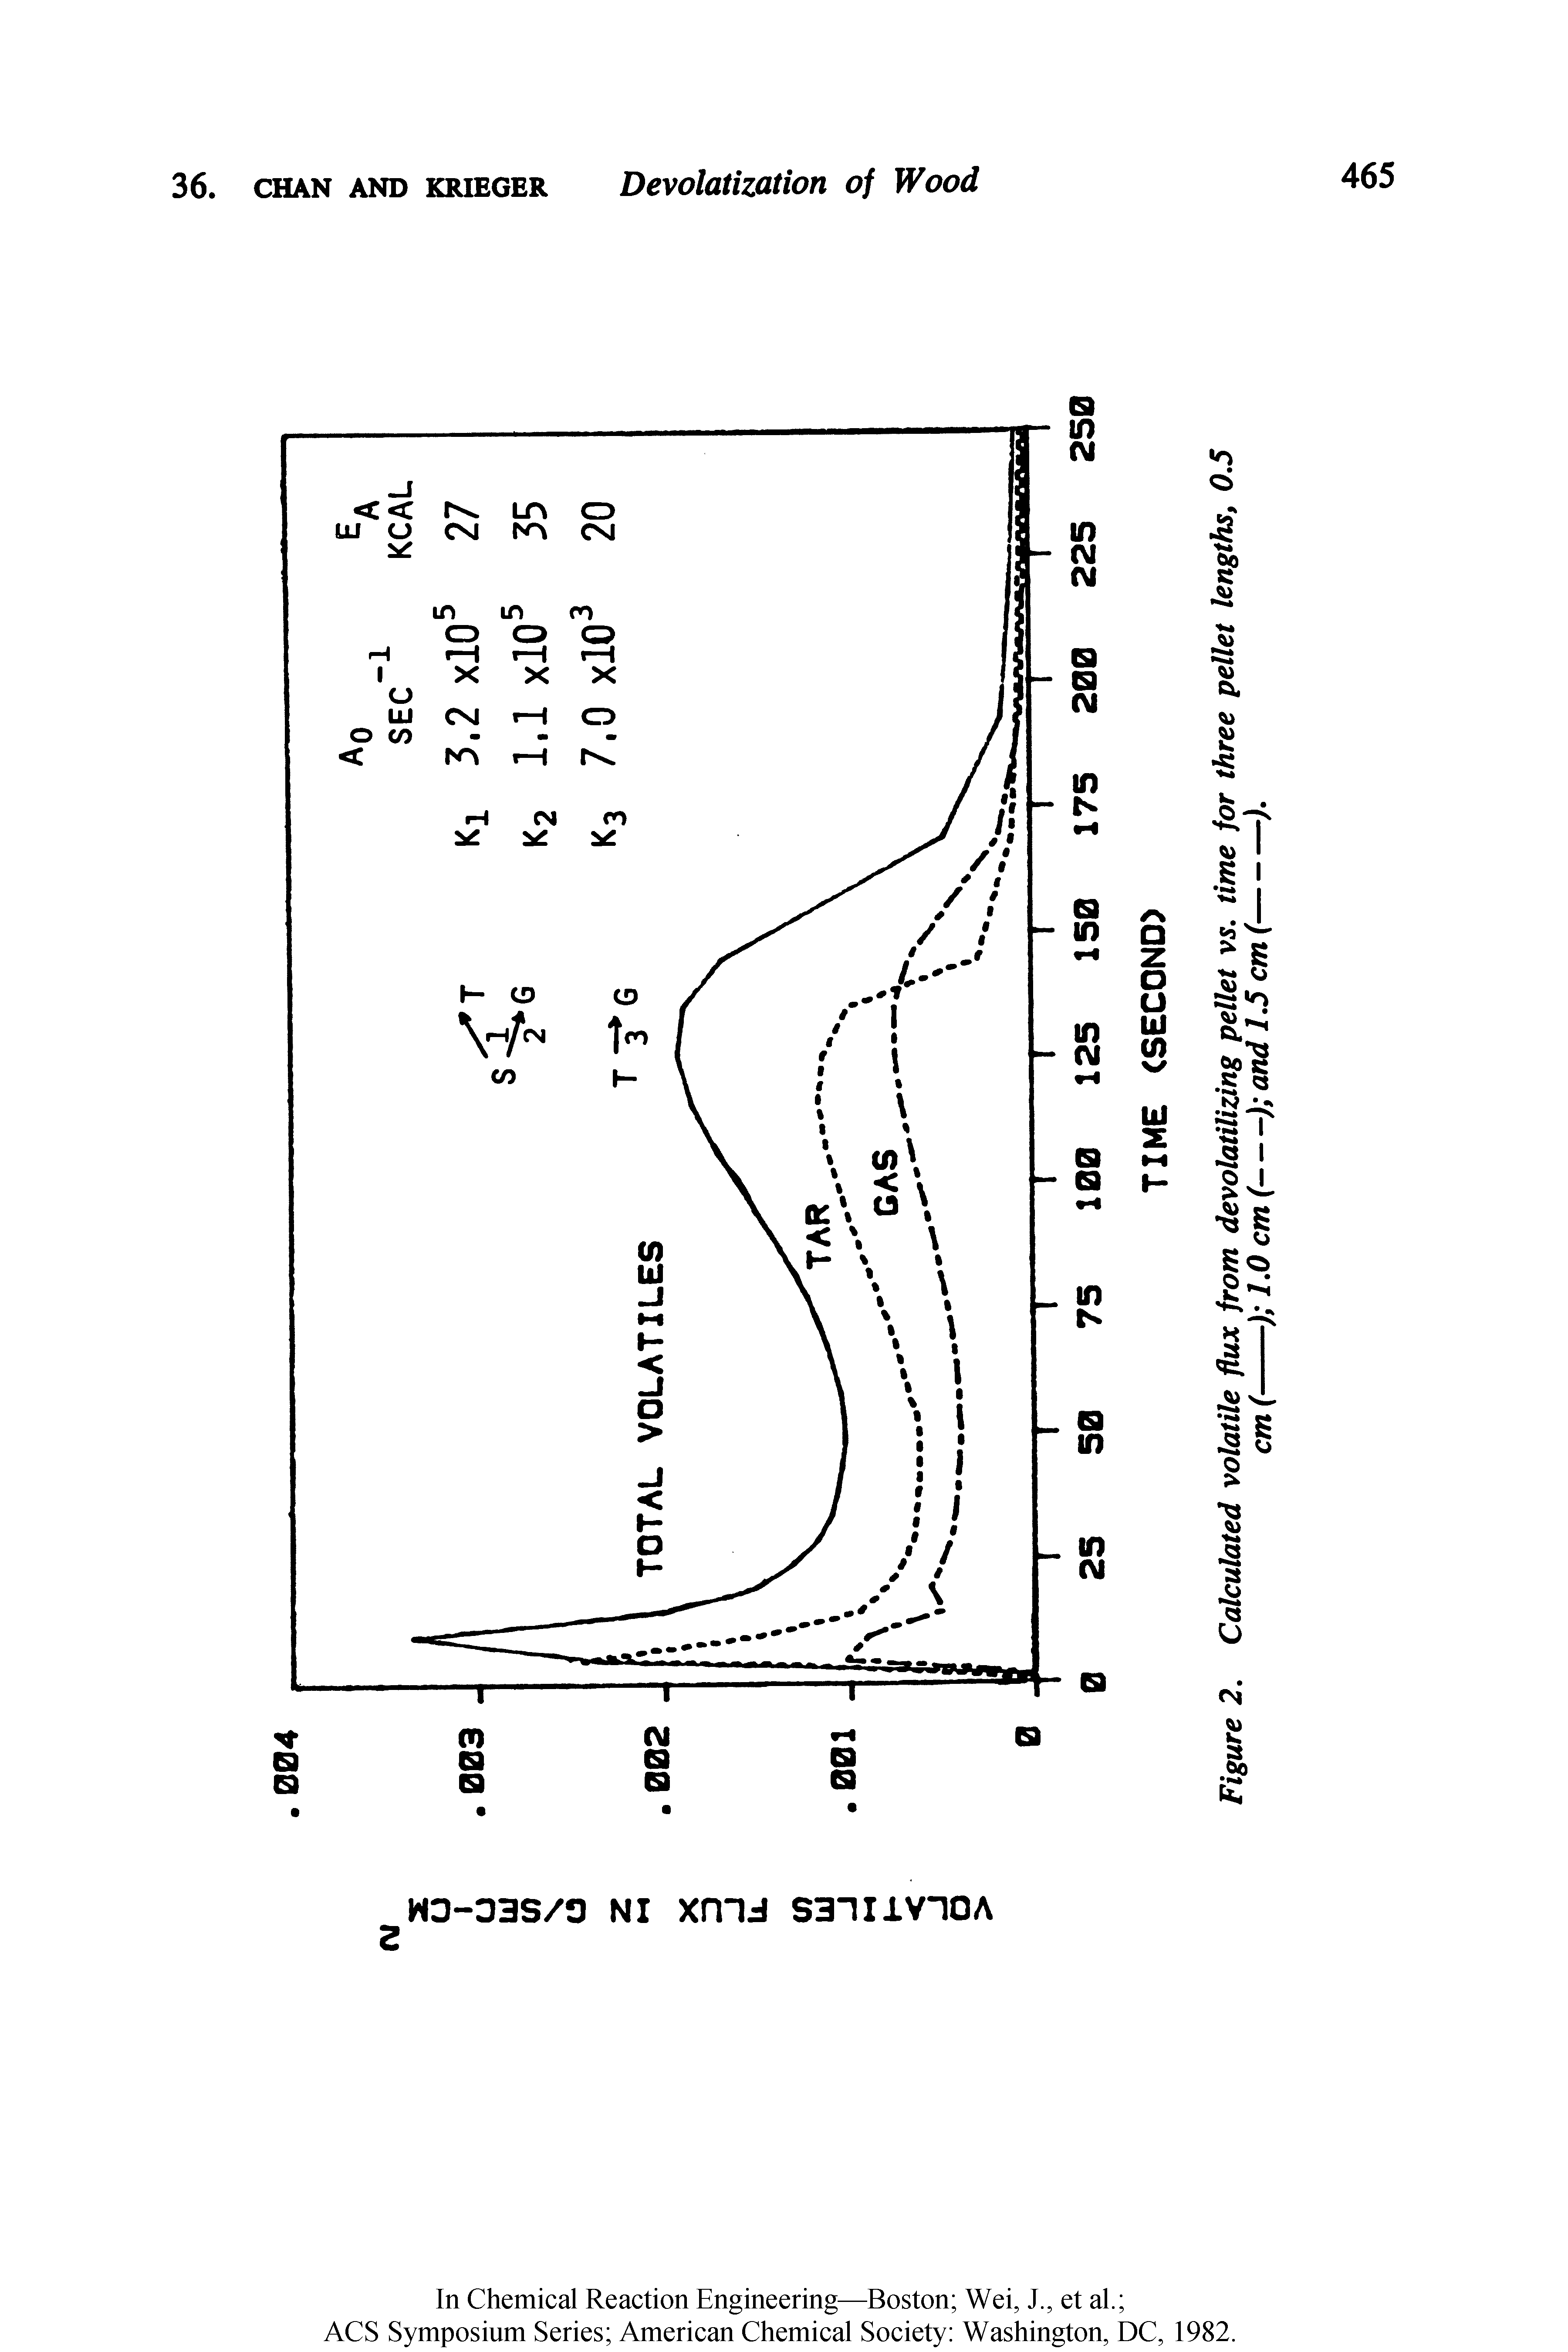 Figure 2. Calculated volatile flux from devolatilizing pellet vs. time for three pellet lengths, 0.5 cm (----------------------------------) 1.0 cm (-----) and 1.5 cm (--------).